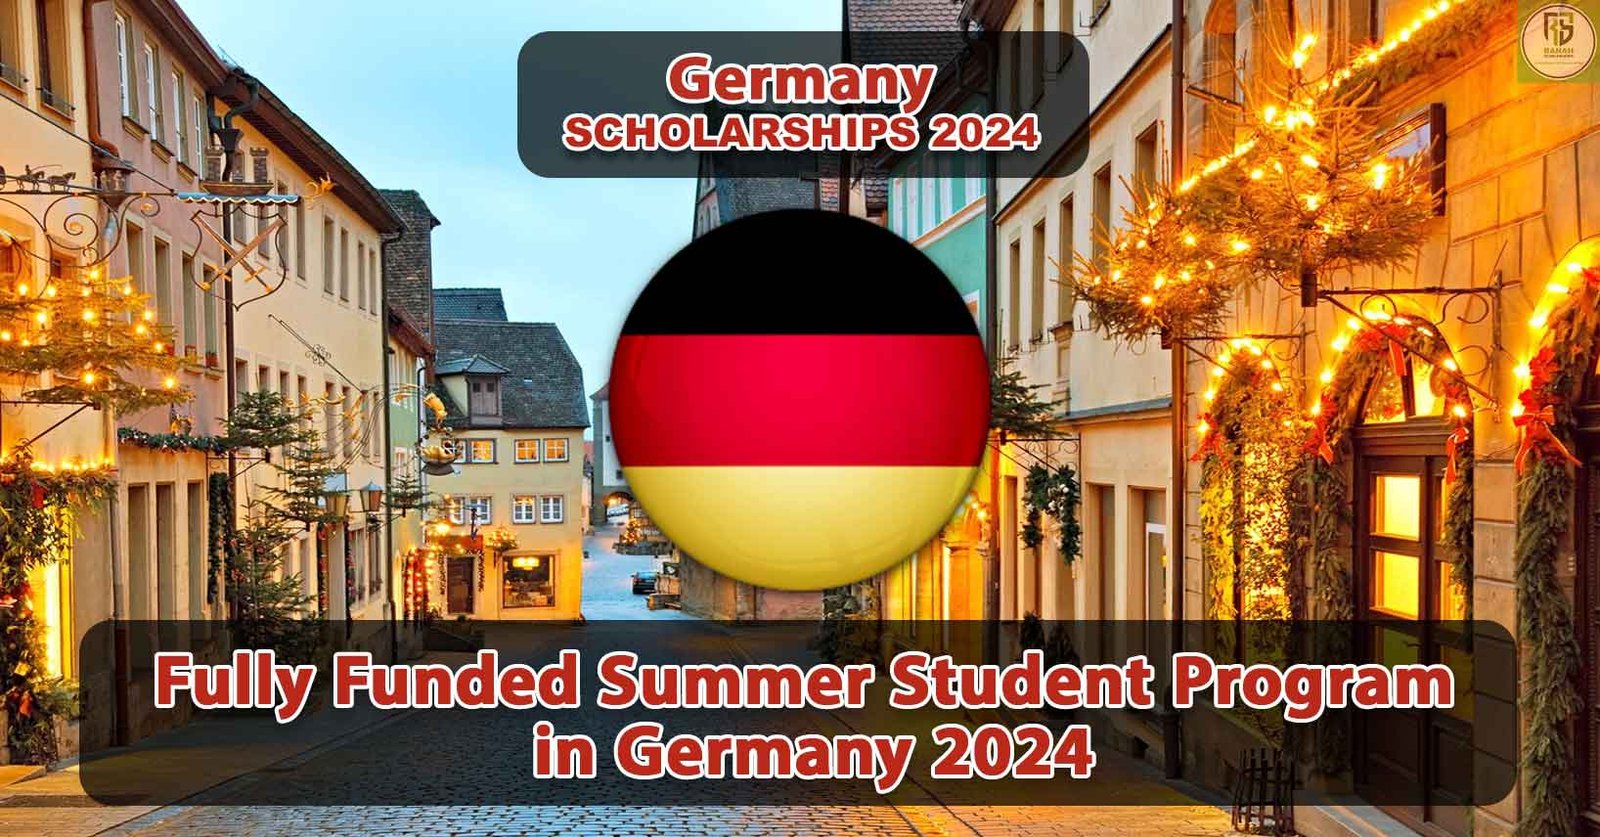 Fully Funded Summer Student Program In Germany 2024 